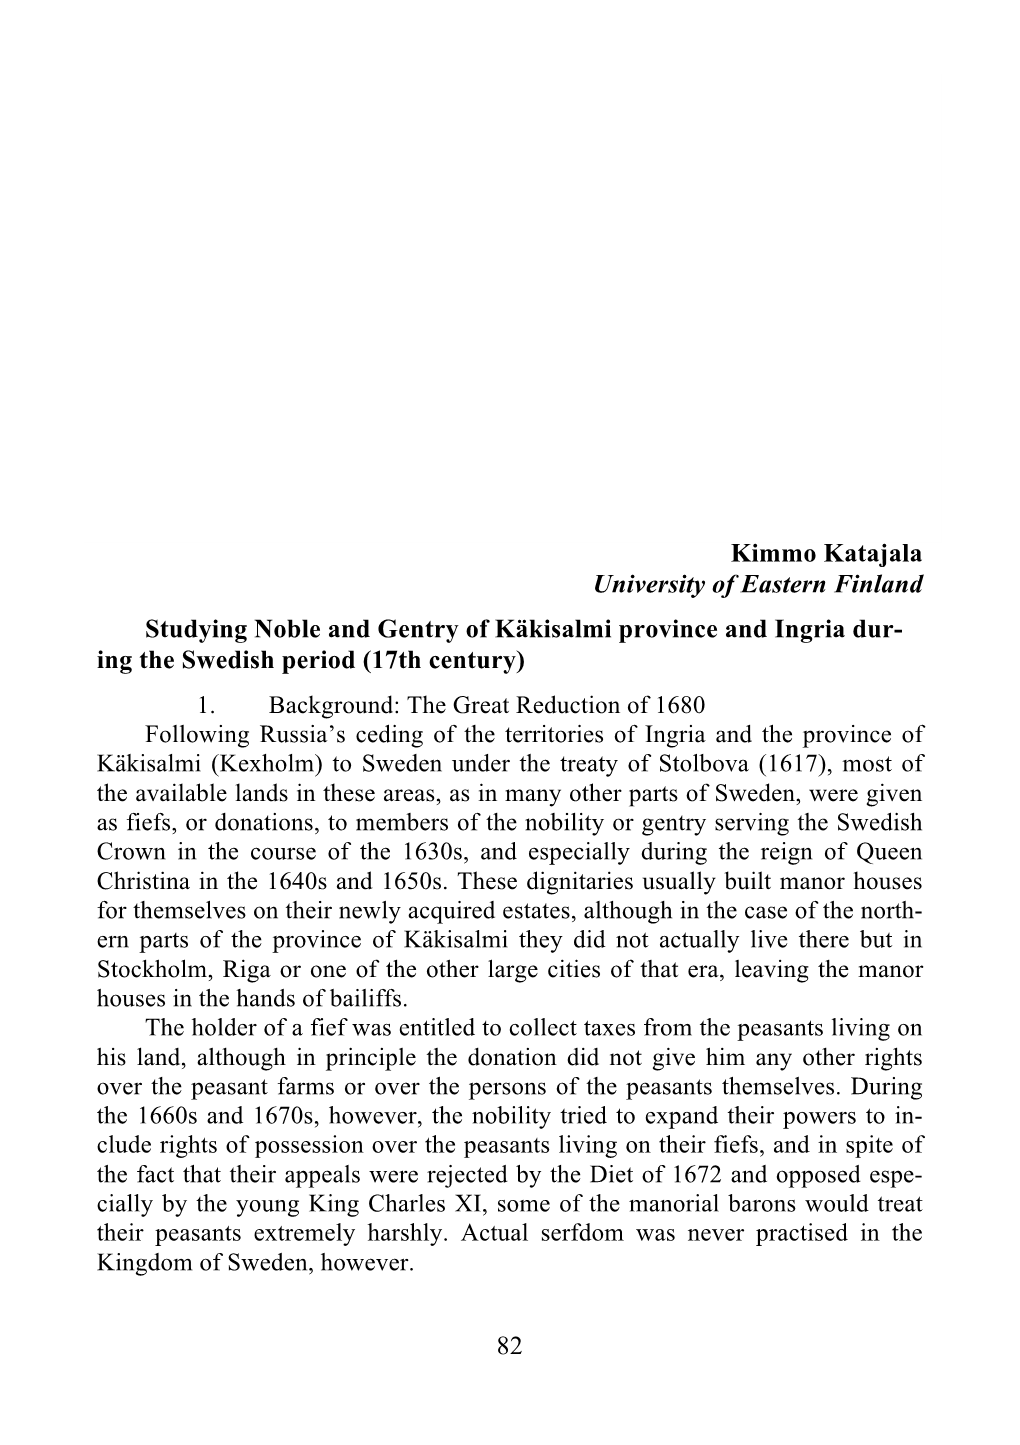 Studying Noble and Gentry of Käkisalmi Province and Ingria Dur- Ing the Swedish Period (17Th Century) 1